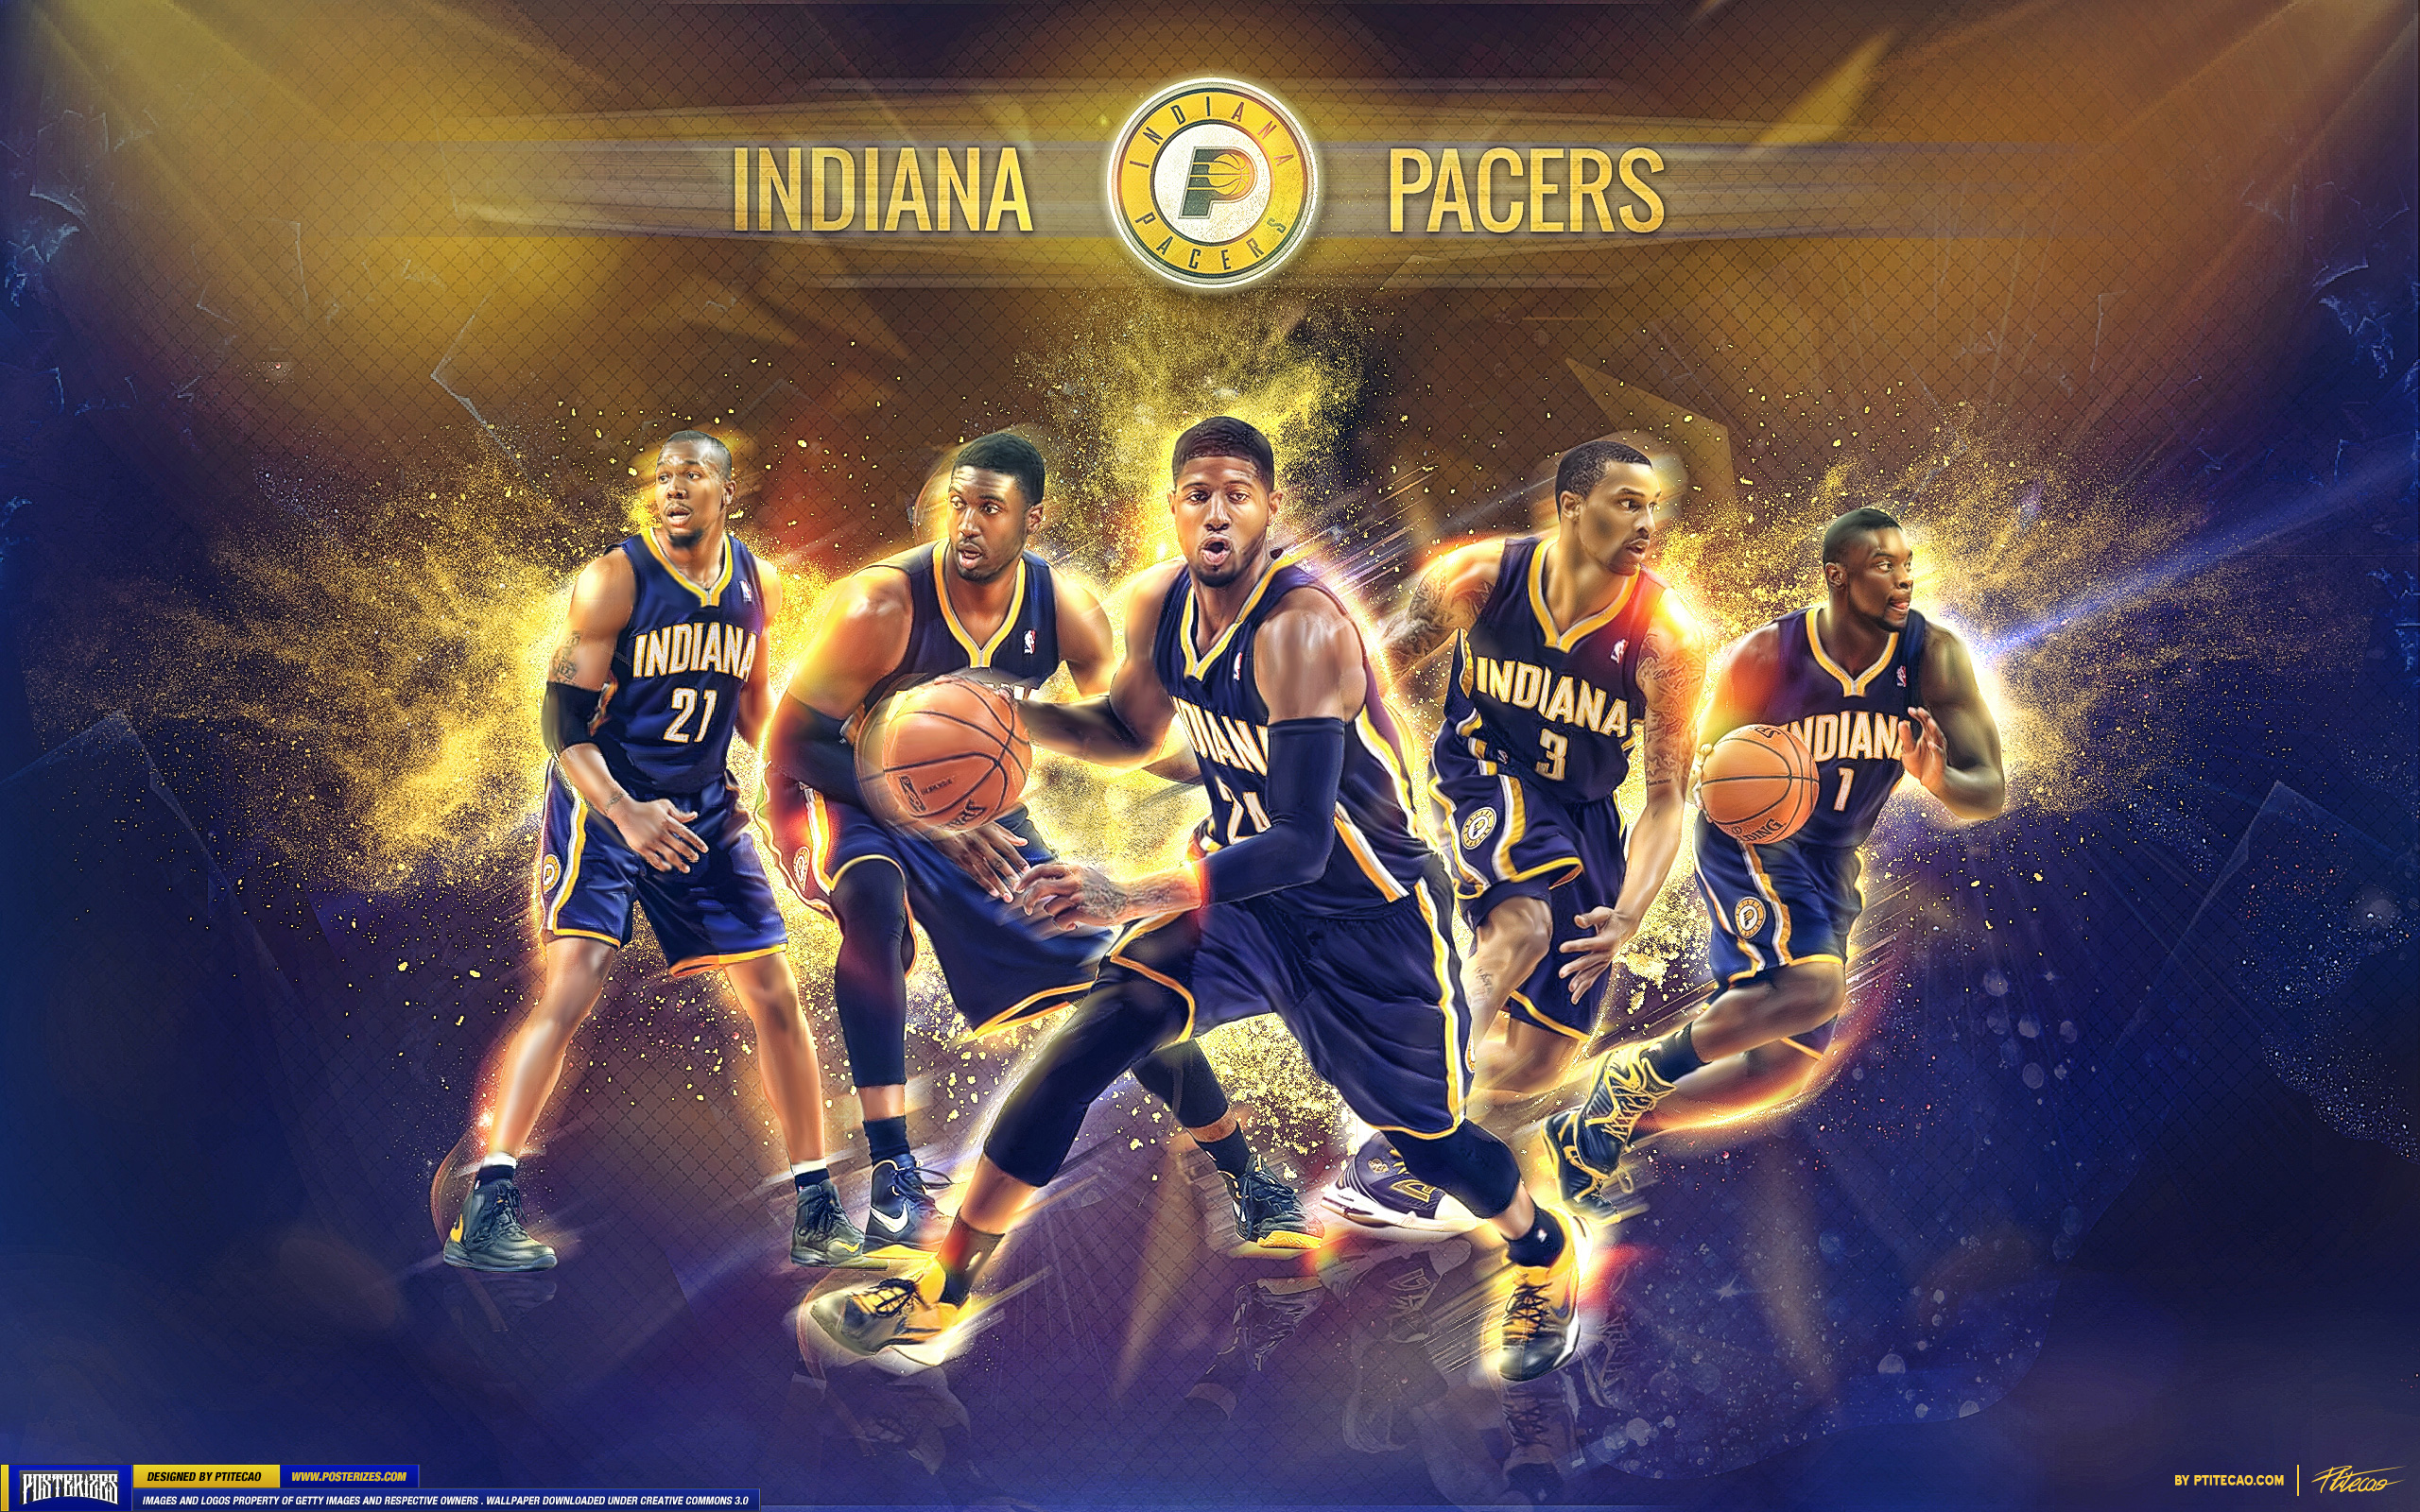 INDIANA PACERS nba basketball 9 wallpaper background